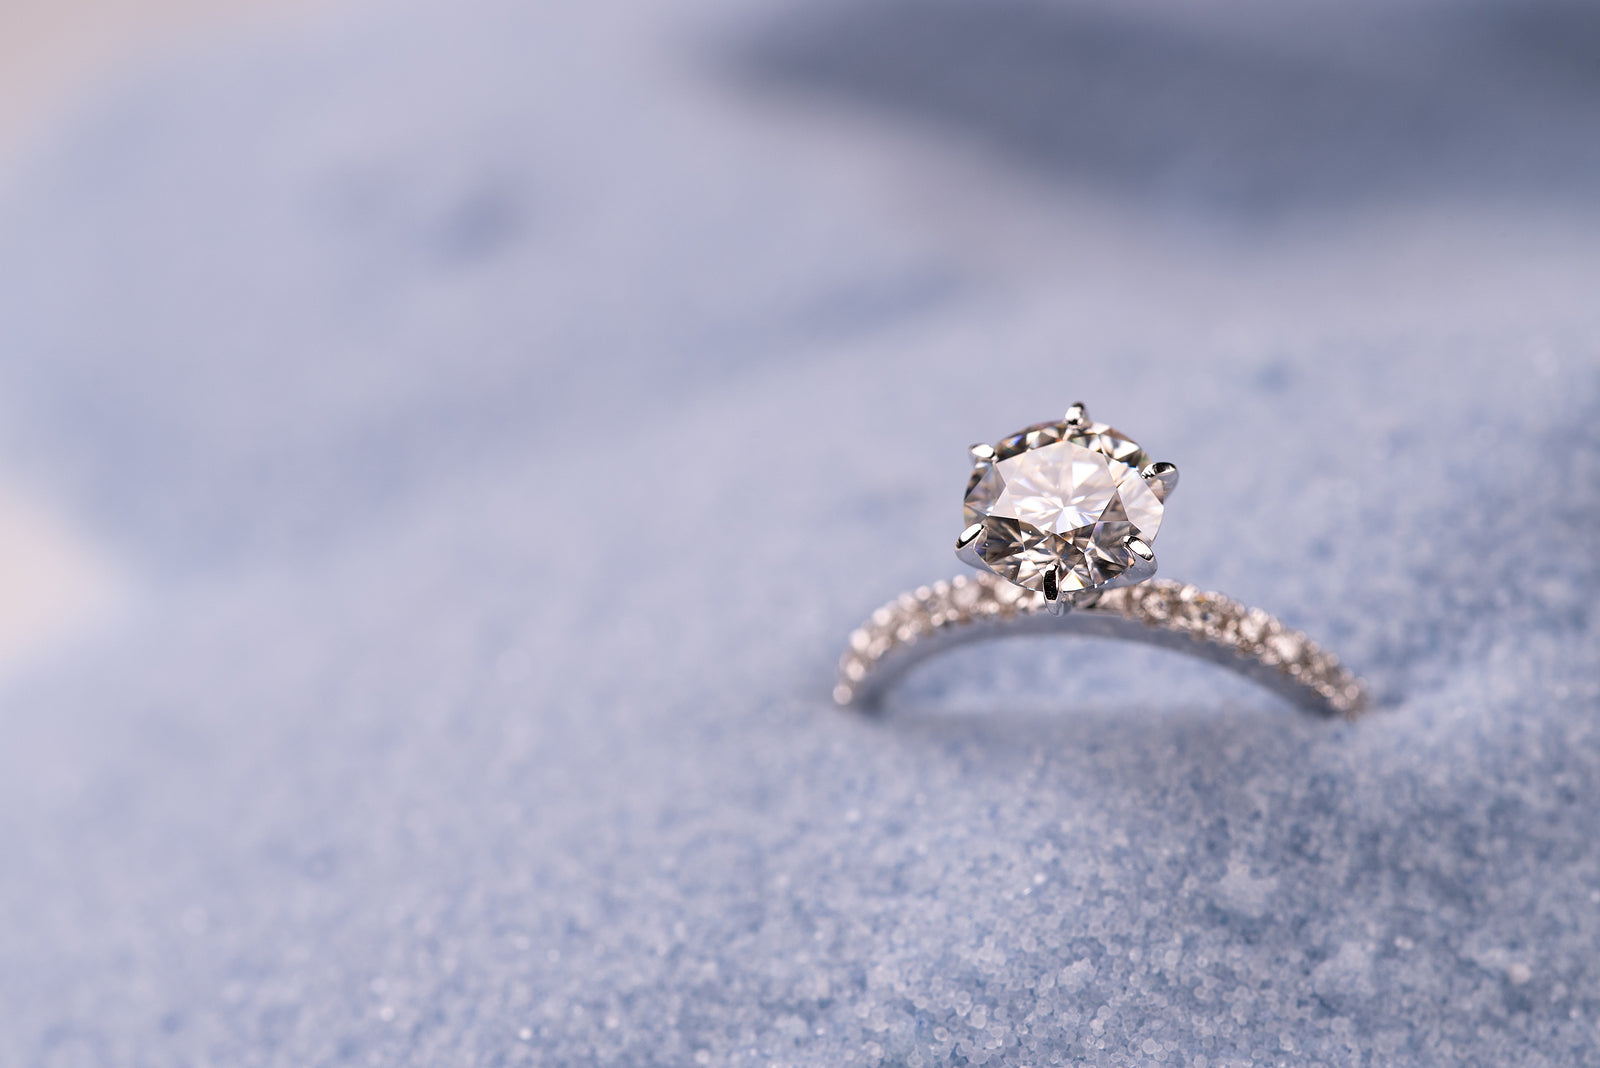 How To Remove Dirt From The White Gold Diamond Ring